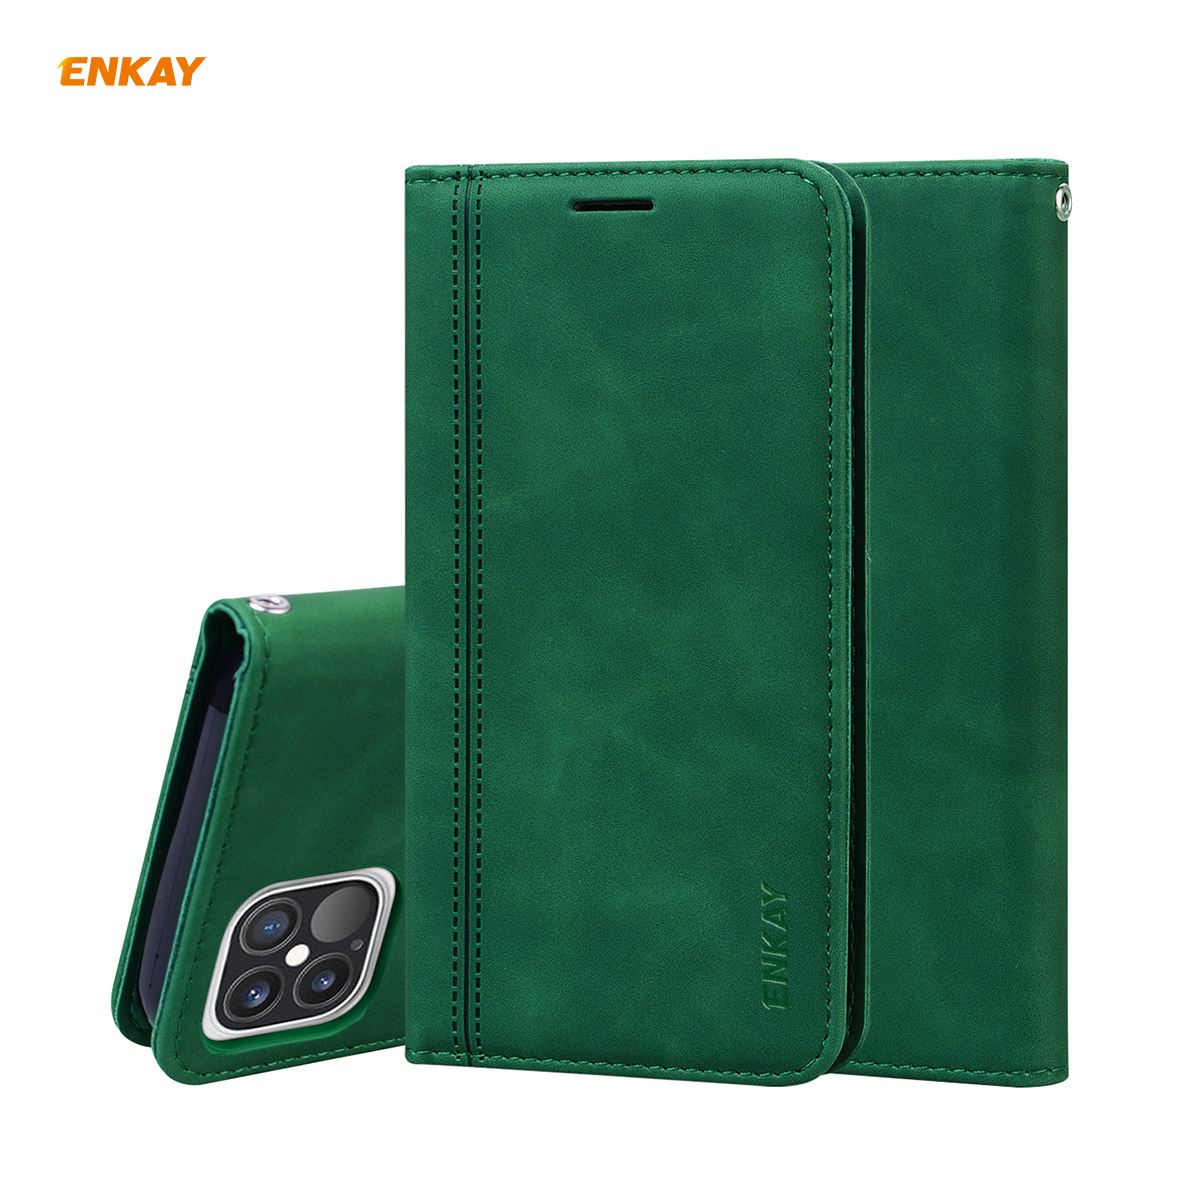 Enkay-for-iPhone-12-Pro-Max-Case-Business-Magnetic-Flip-with-Card-Slot-Stand-PU-Leather--TPU-Full-Co-1755830-7